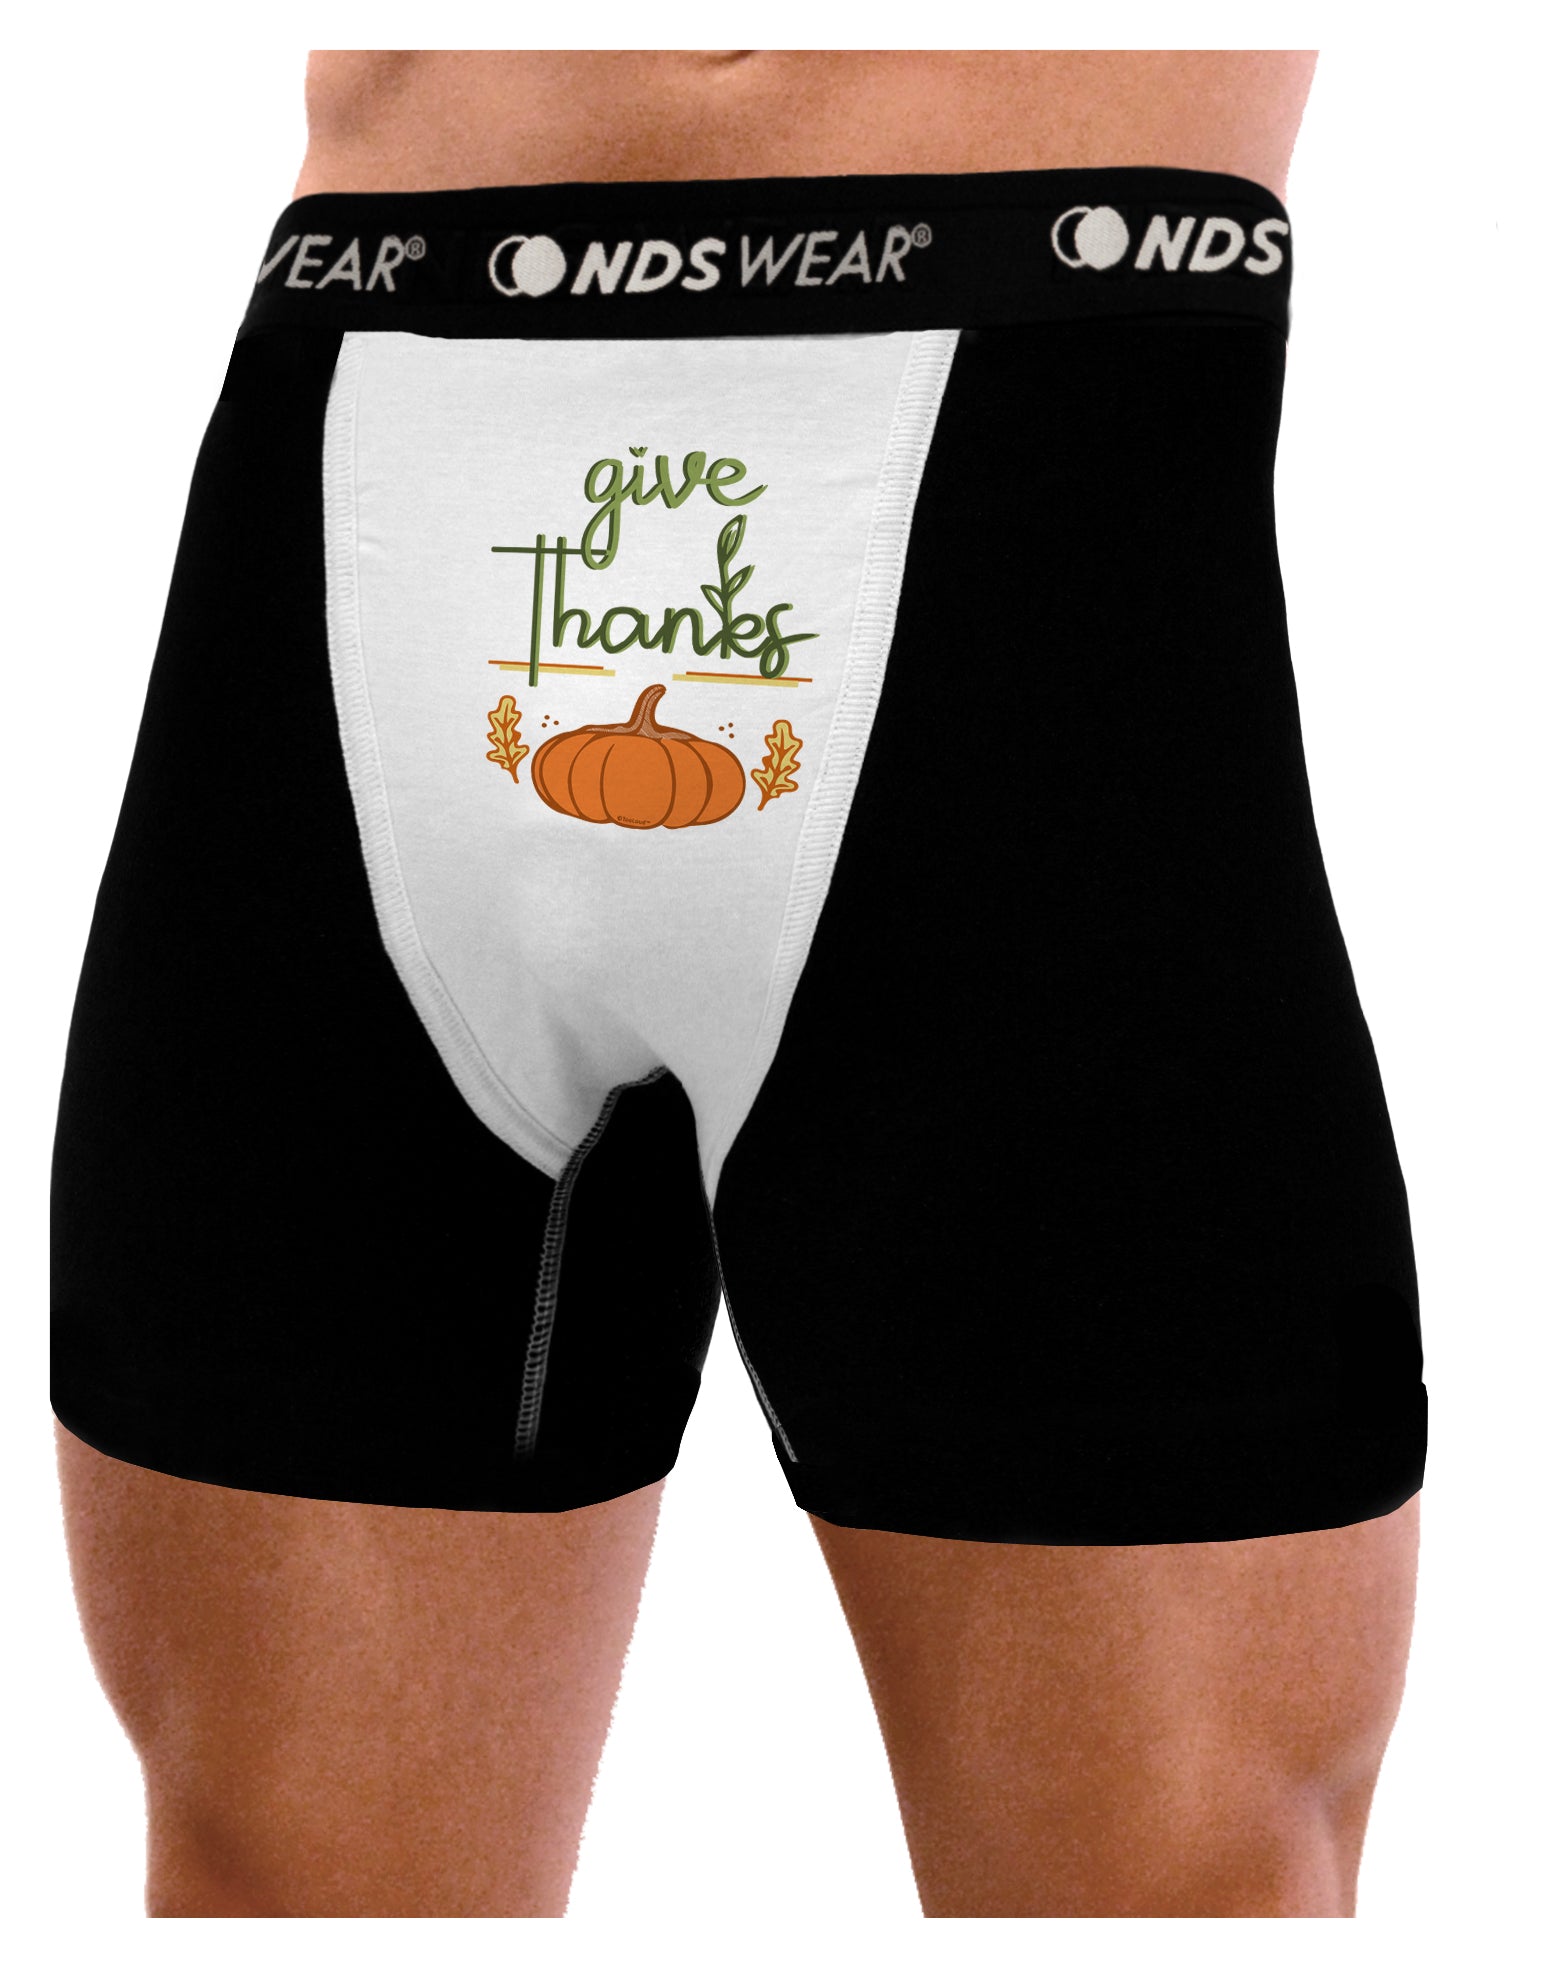 Time to Give Thanks Mens NDS Wear Briefs Underwear Small Tooloud - Davson  Sales